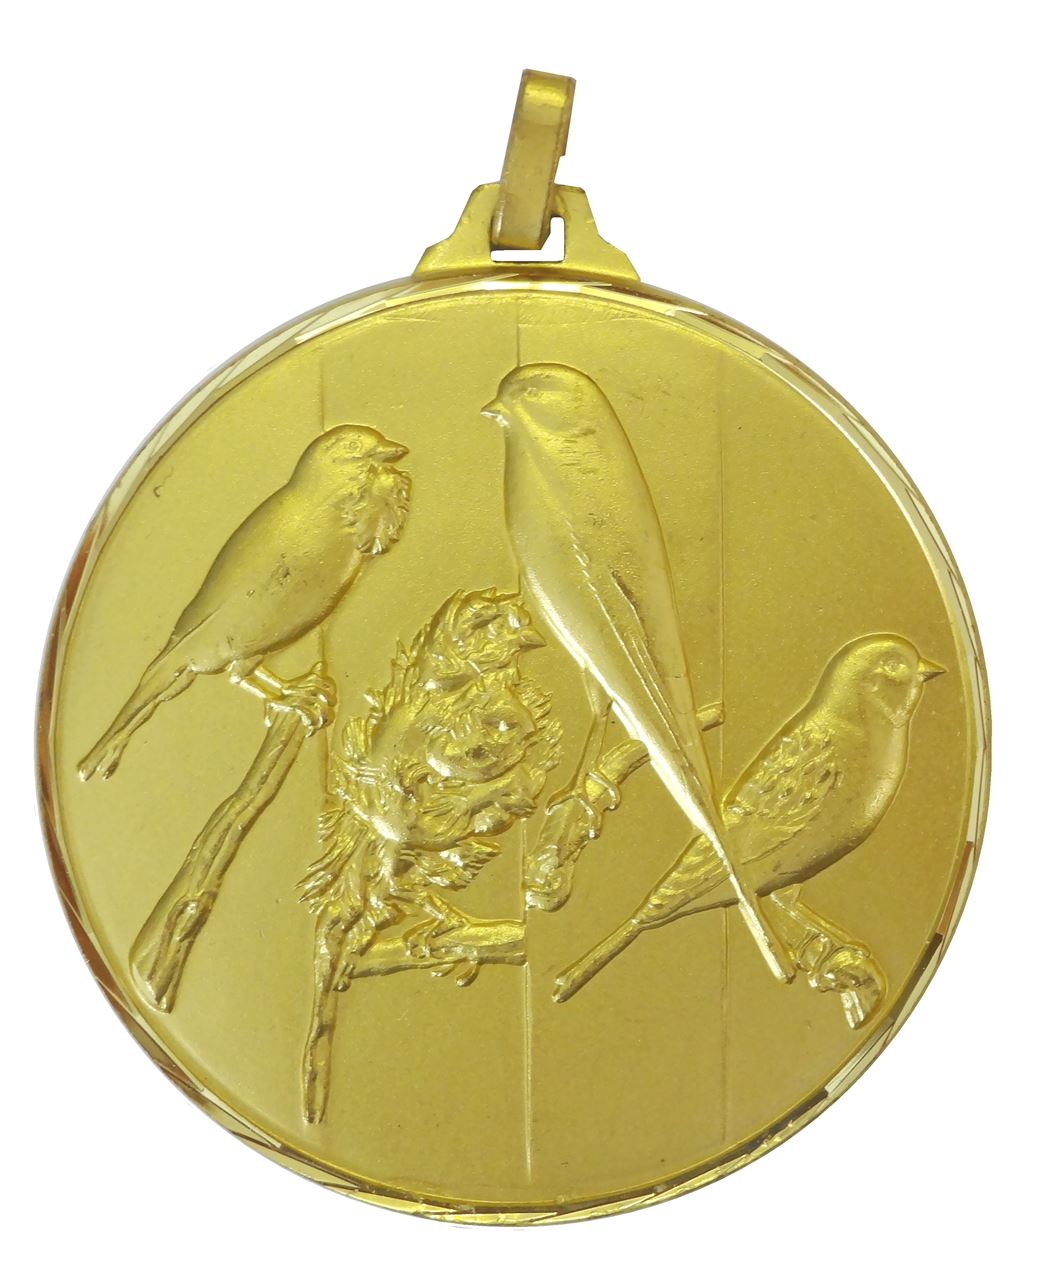 Gold Faceted Bird Medal (size: 52mm) - 341F